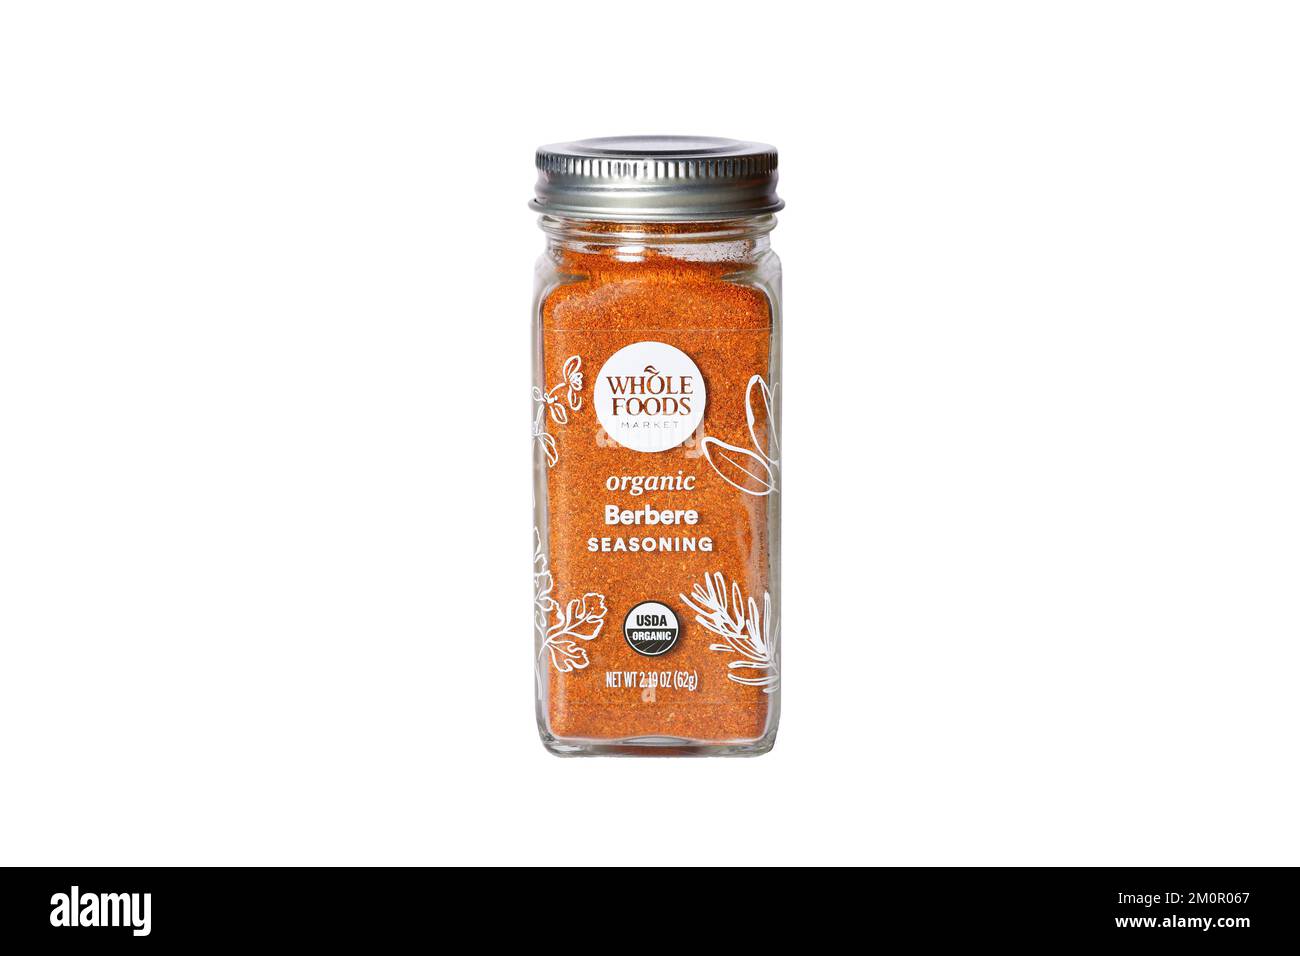 A jar of Whole Foods Market brand Berbere seasoning. Ethiopian cuisine spice mix cutout image for illustration and editorial use. Stock Photo